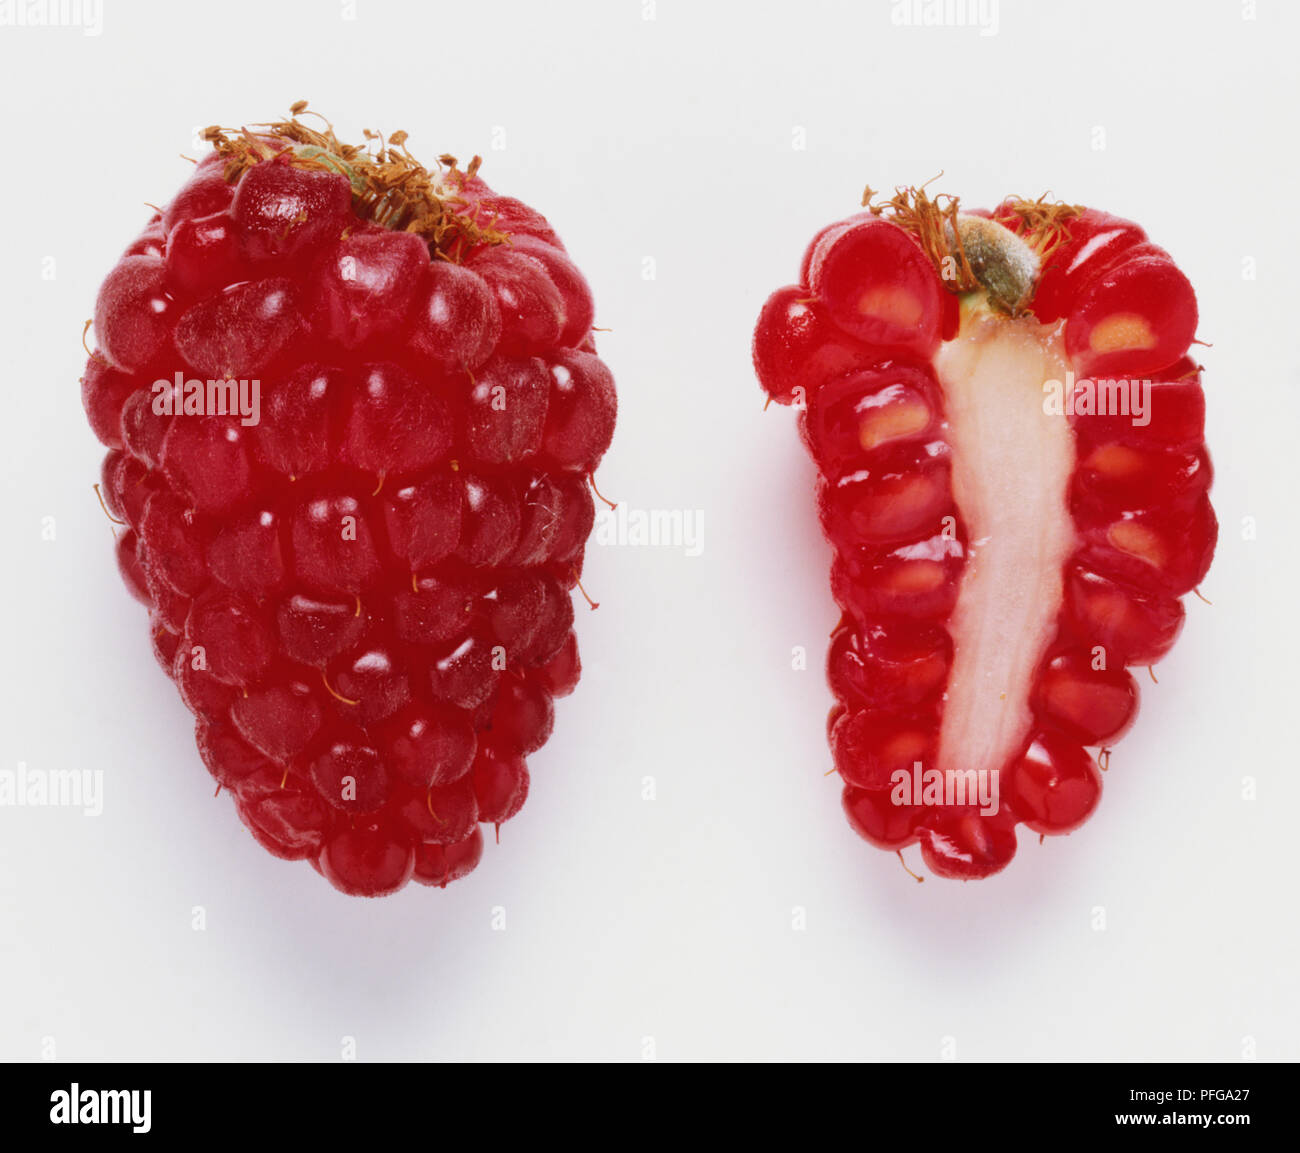 A whole raspberry beside a cross section of a raspberry. Stock Photo